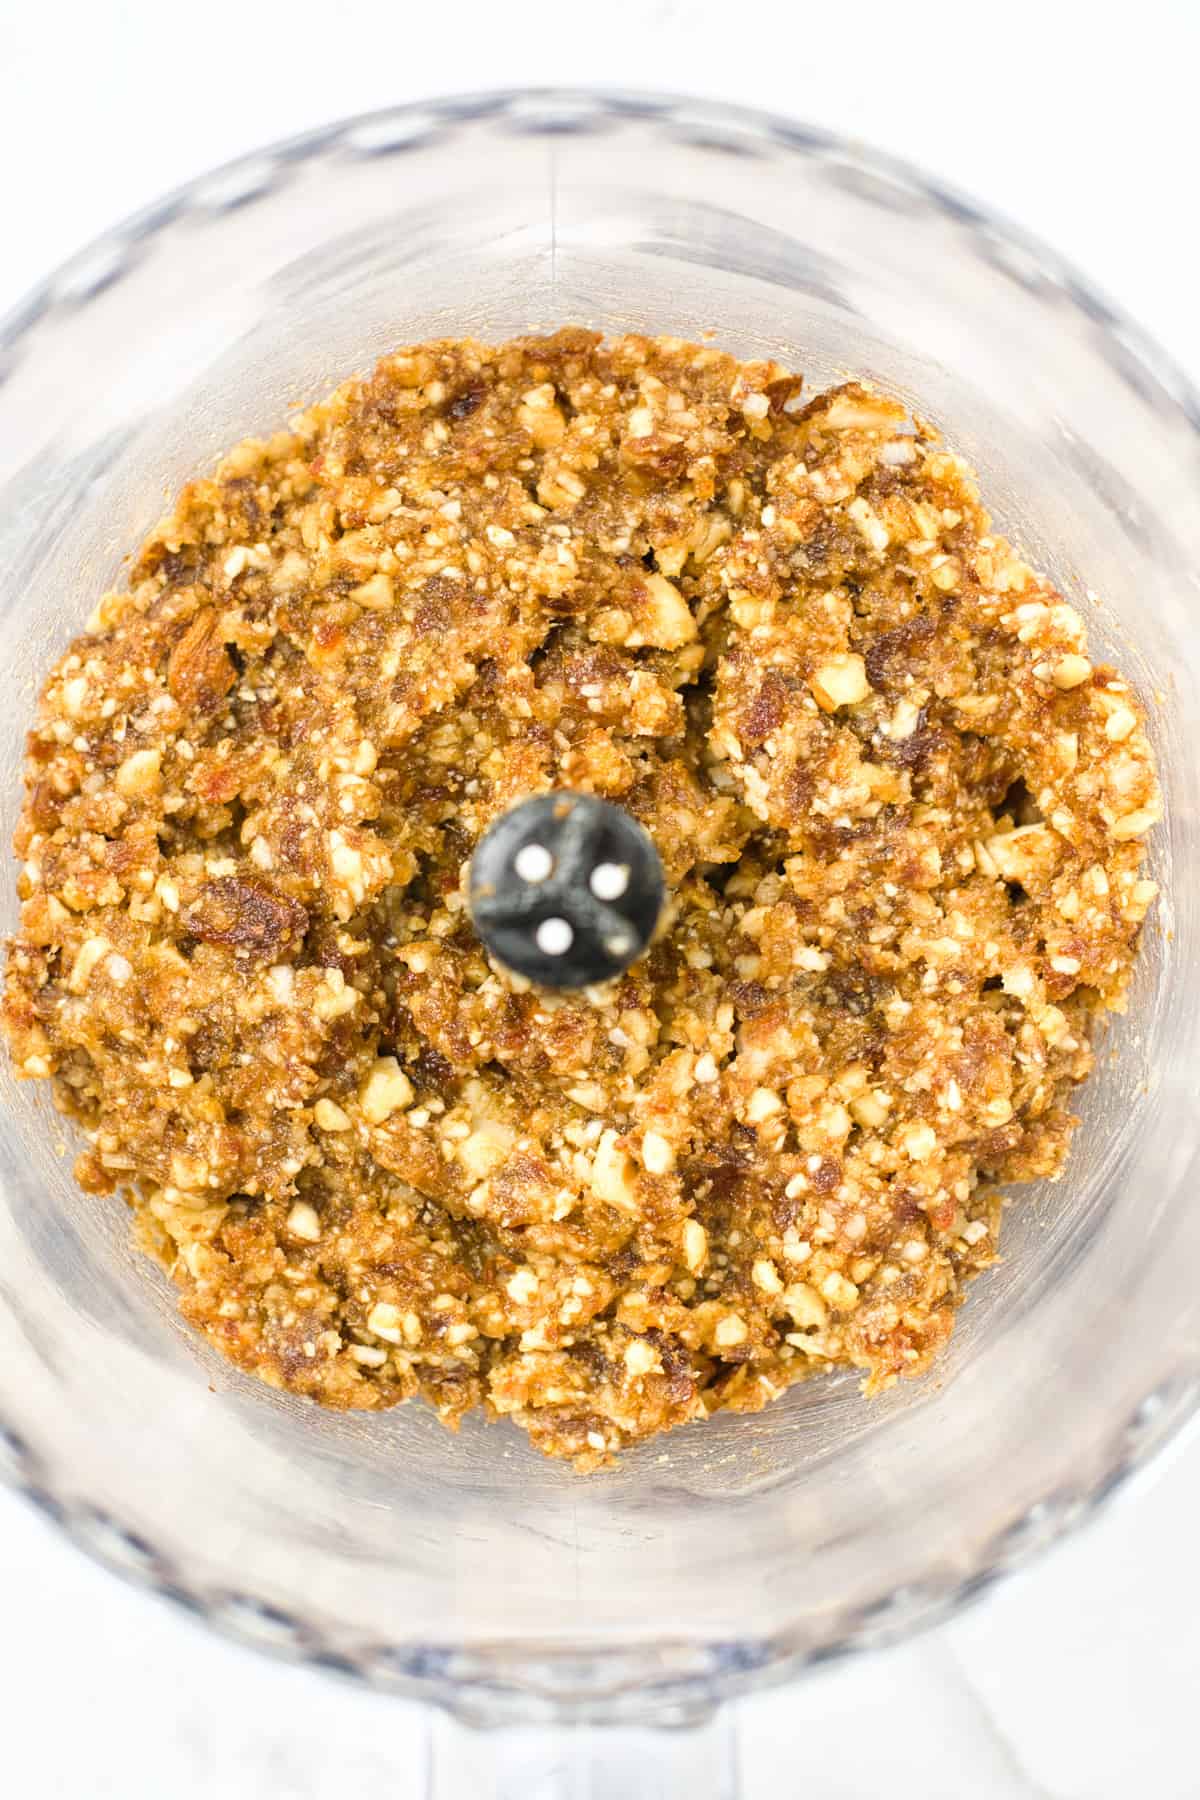 Blended dates, nuts and coconut in a food processor.